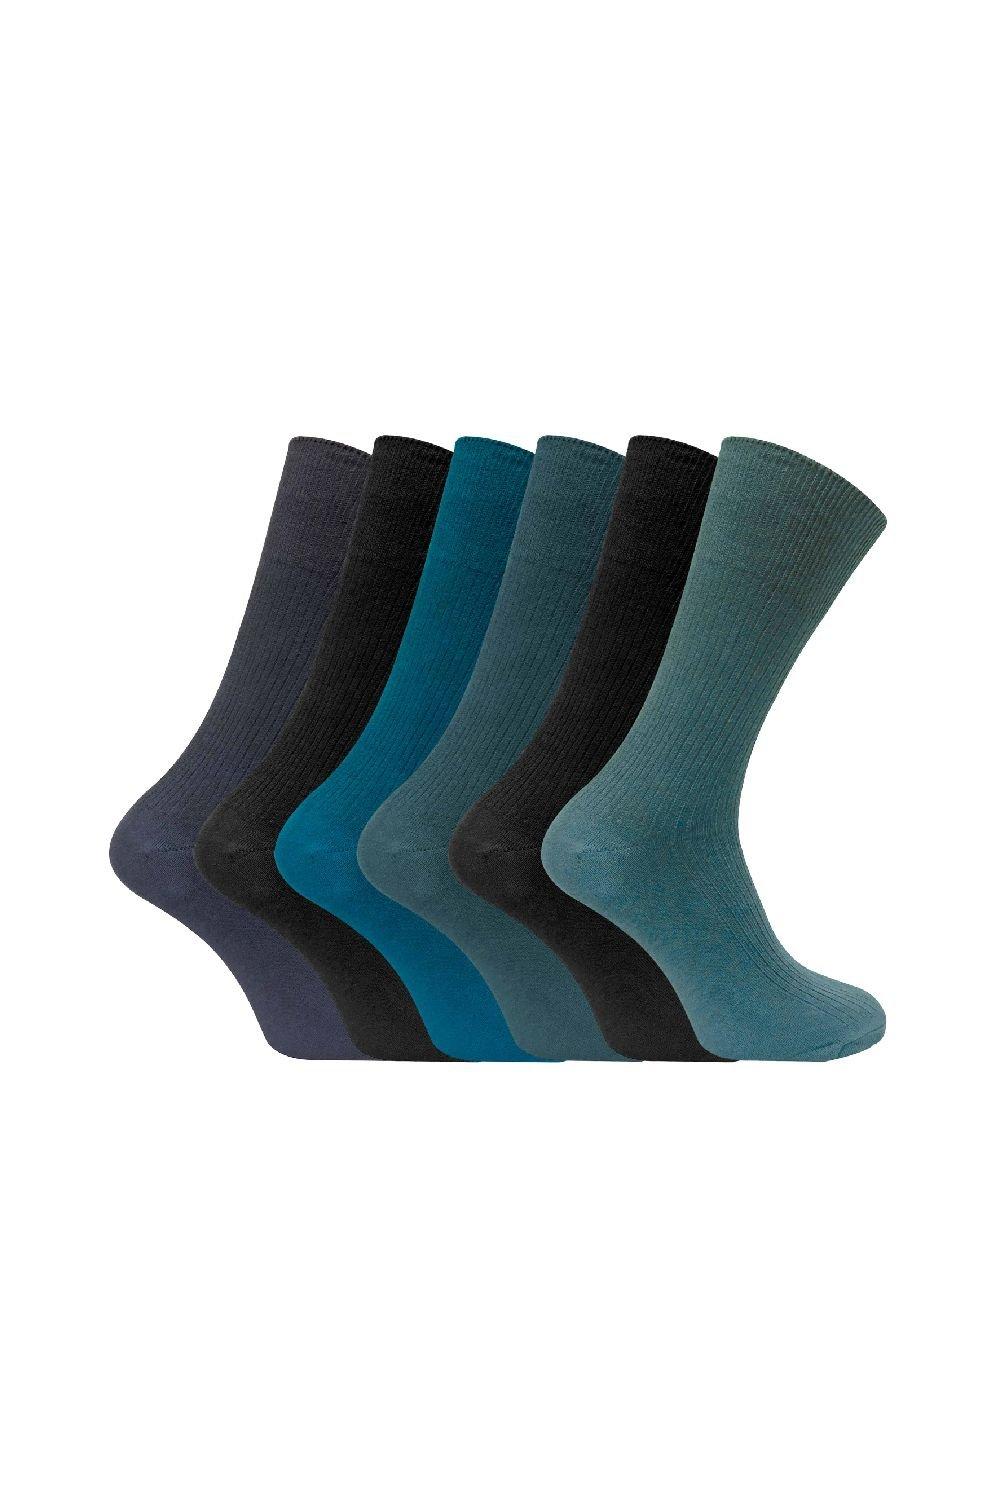 6 Pairs Cotton Non Elastic Loose Wide Top Dress Socks